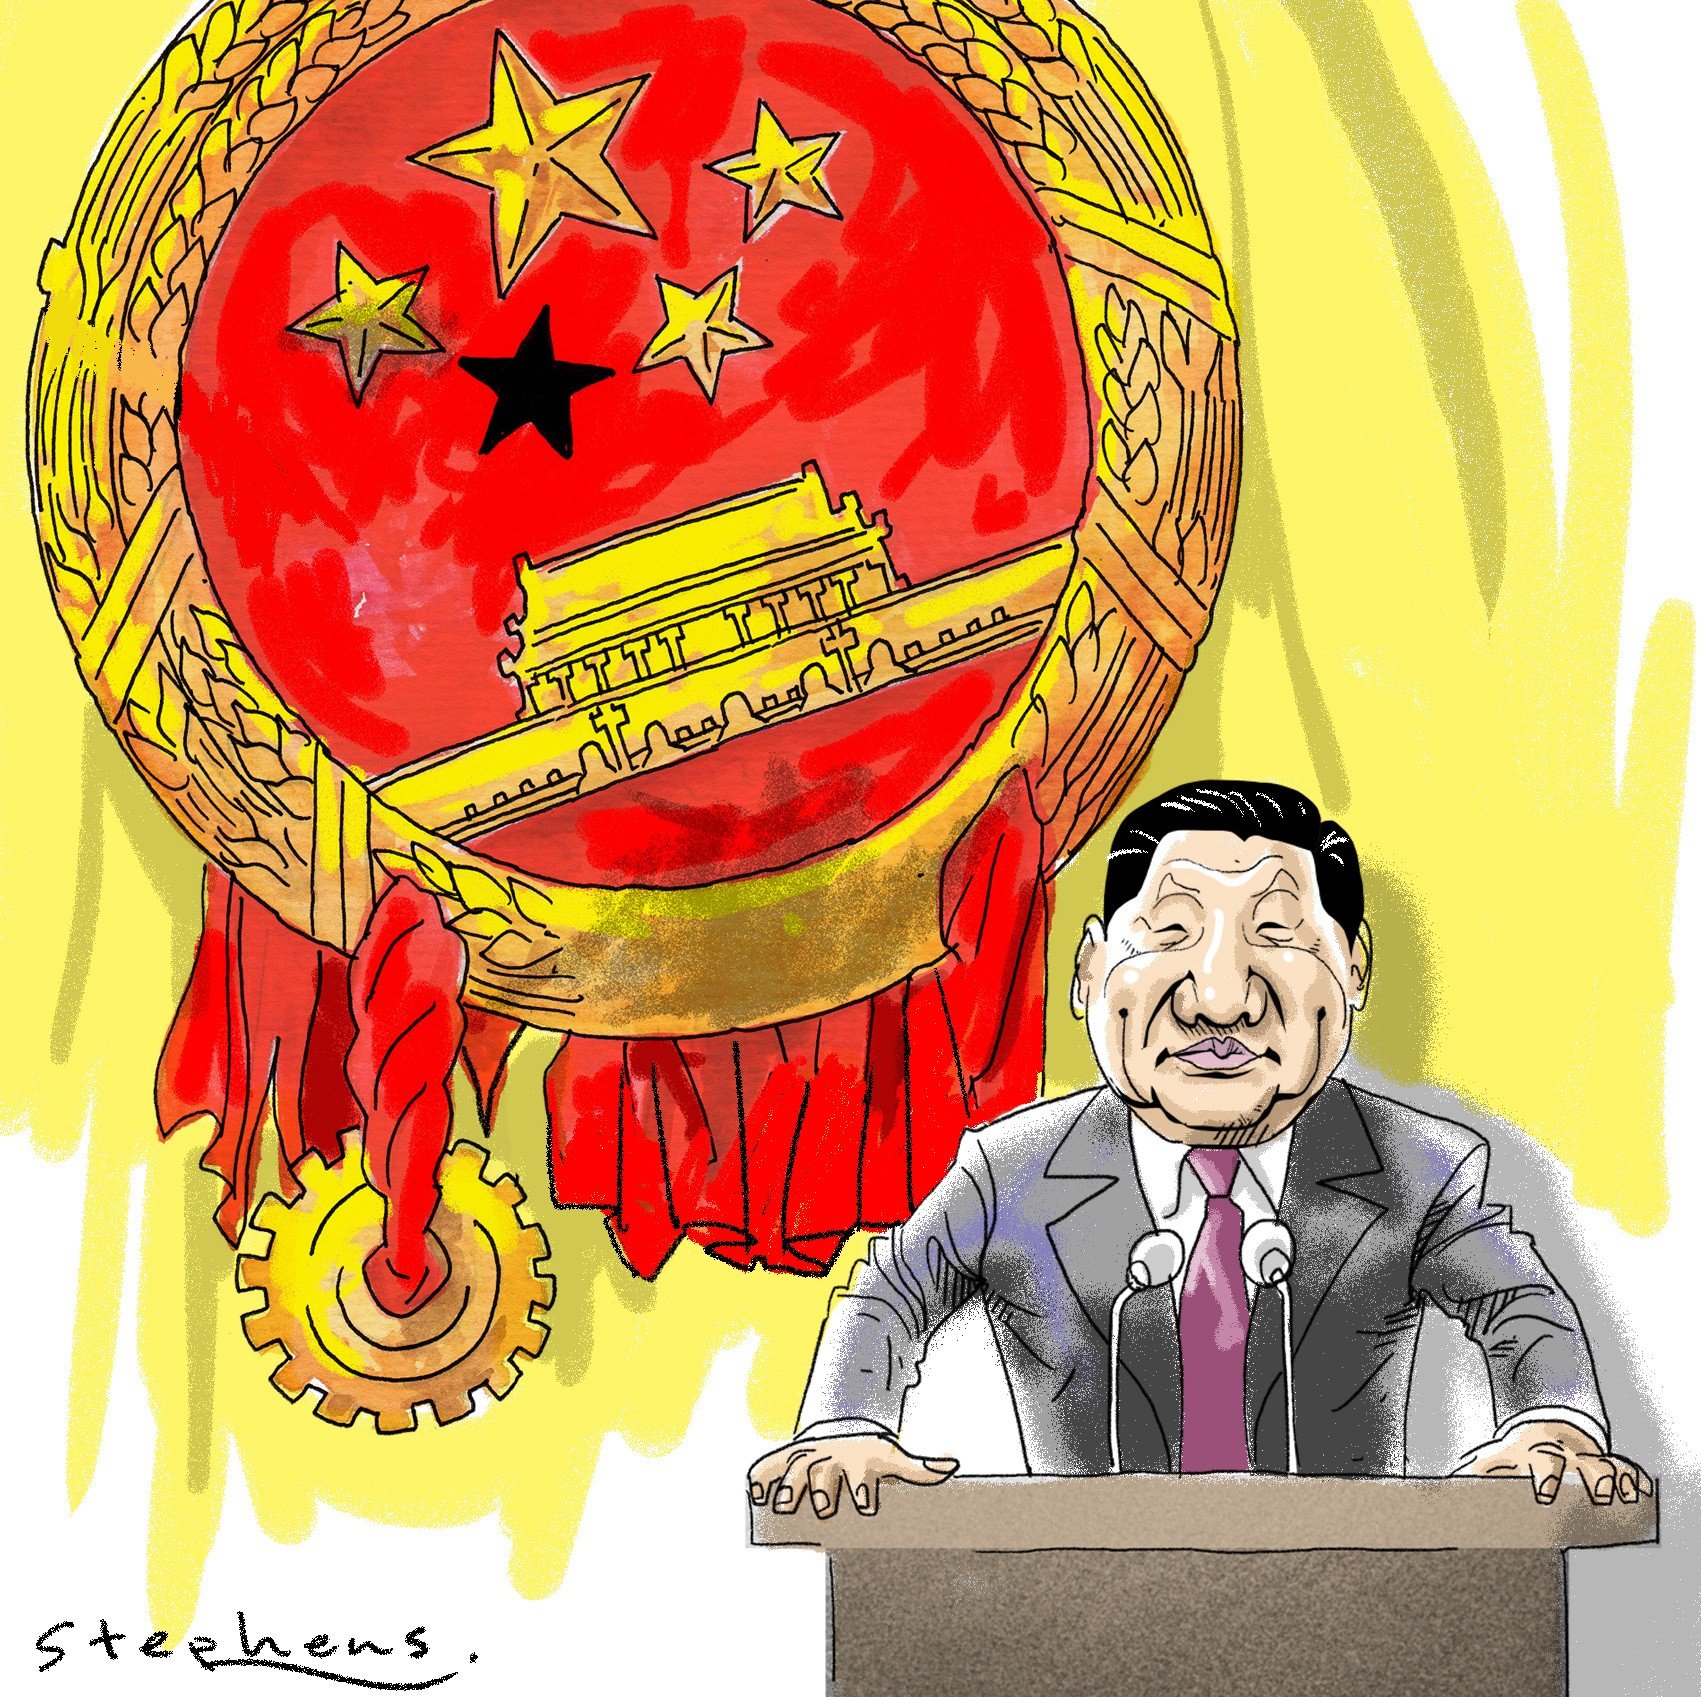 Lanxin Xiang says the damaging Mao-inspired campaign to establish the president’s authority and questions about the opaque anti-corruption drive indicate that, without serious reforms in the 19th party congress, Xi’s China Dream may be unsustainable